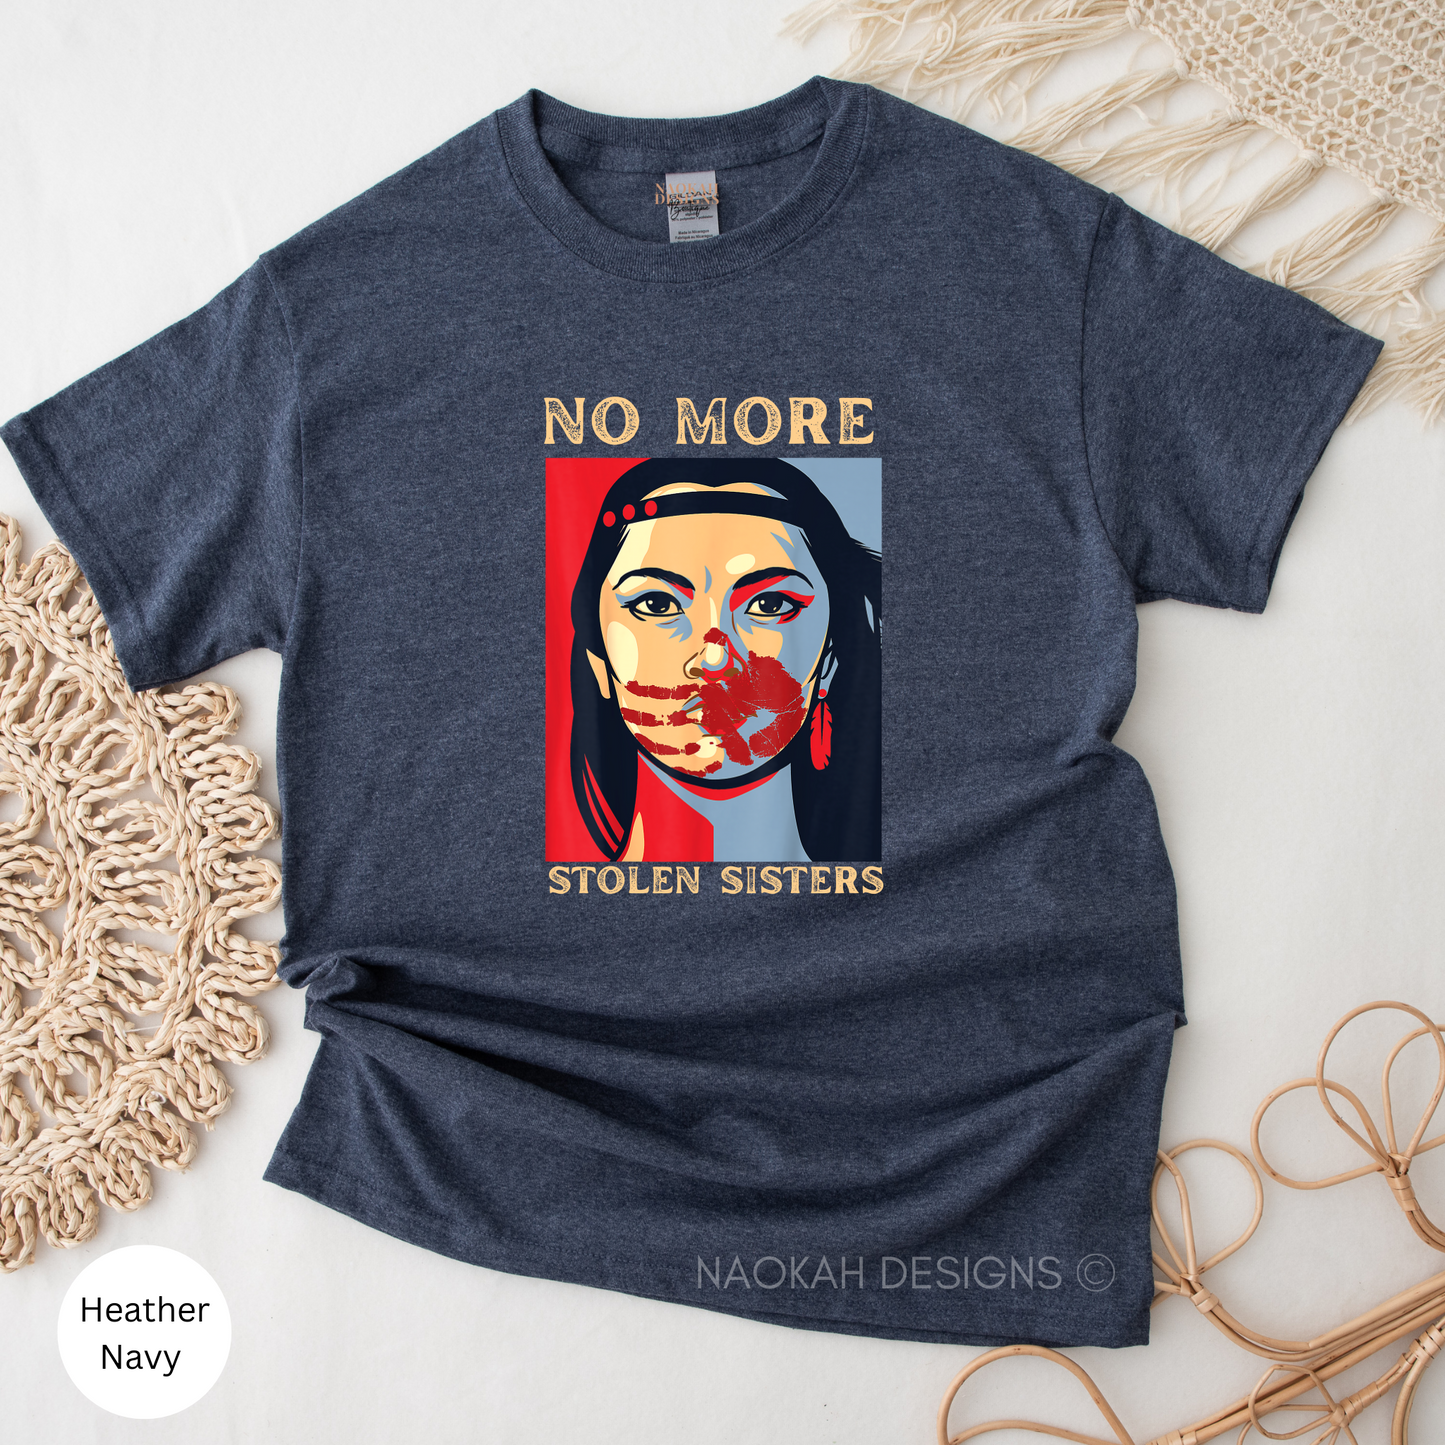 no more stolen sisters shirt, missing and murdered indigenous women shirt, mmiw shirt, i wear red for my sisters shirt, indigenous owned shop